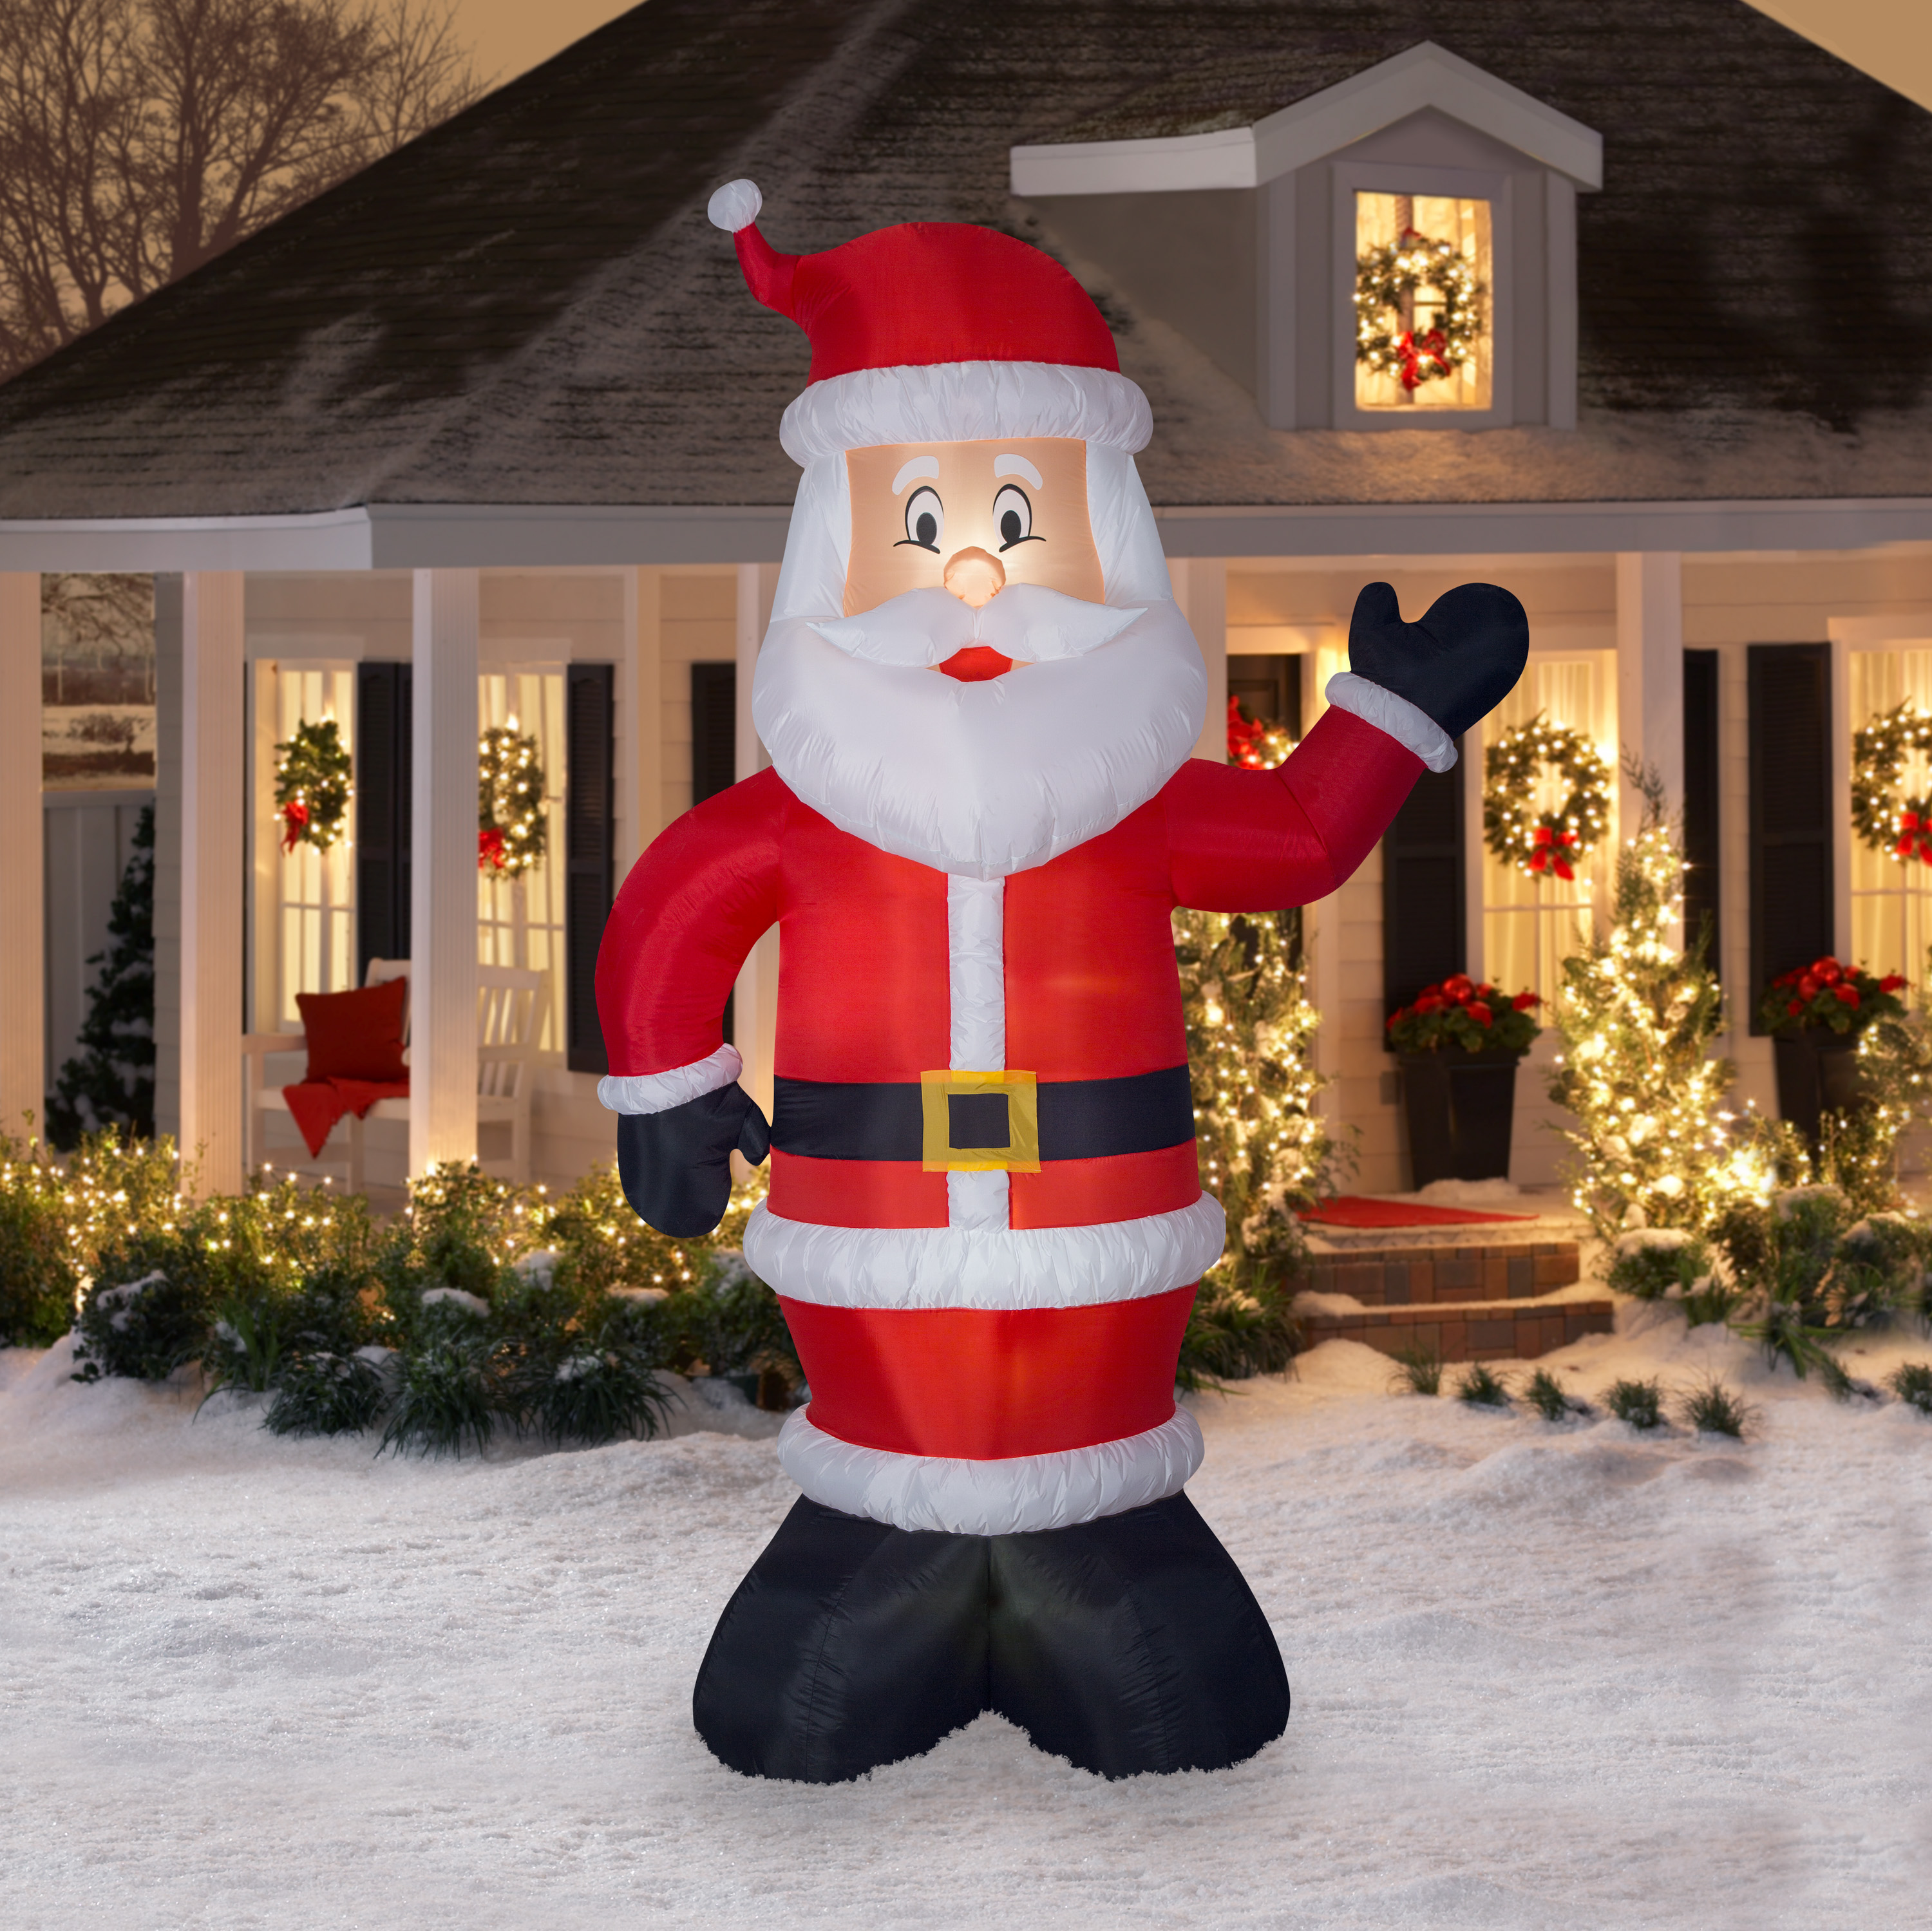 Gemmy Industries Airblown Inflatable Santa, 10' - image 5 of 5